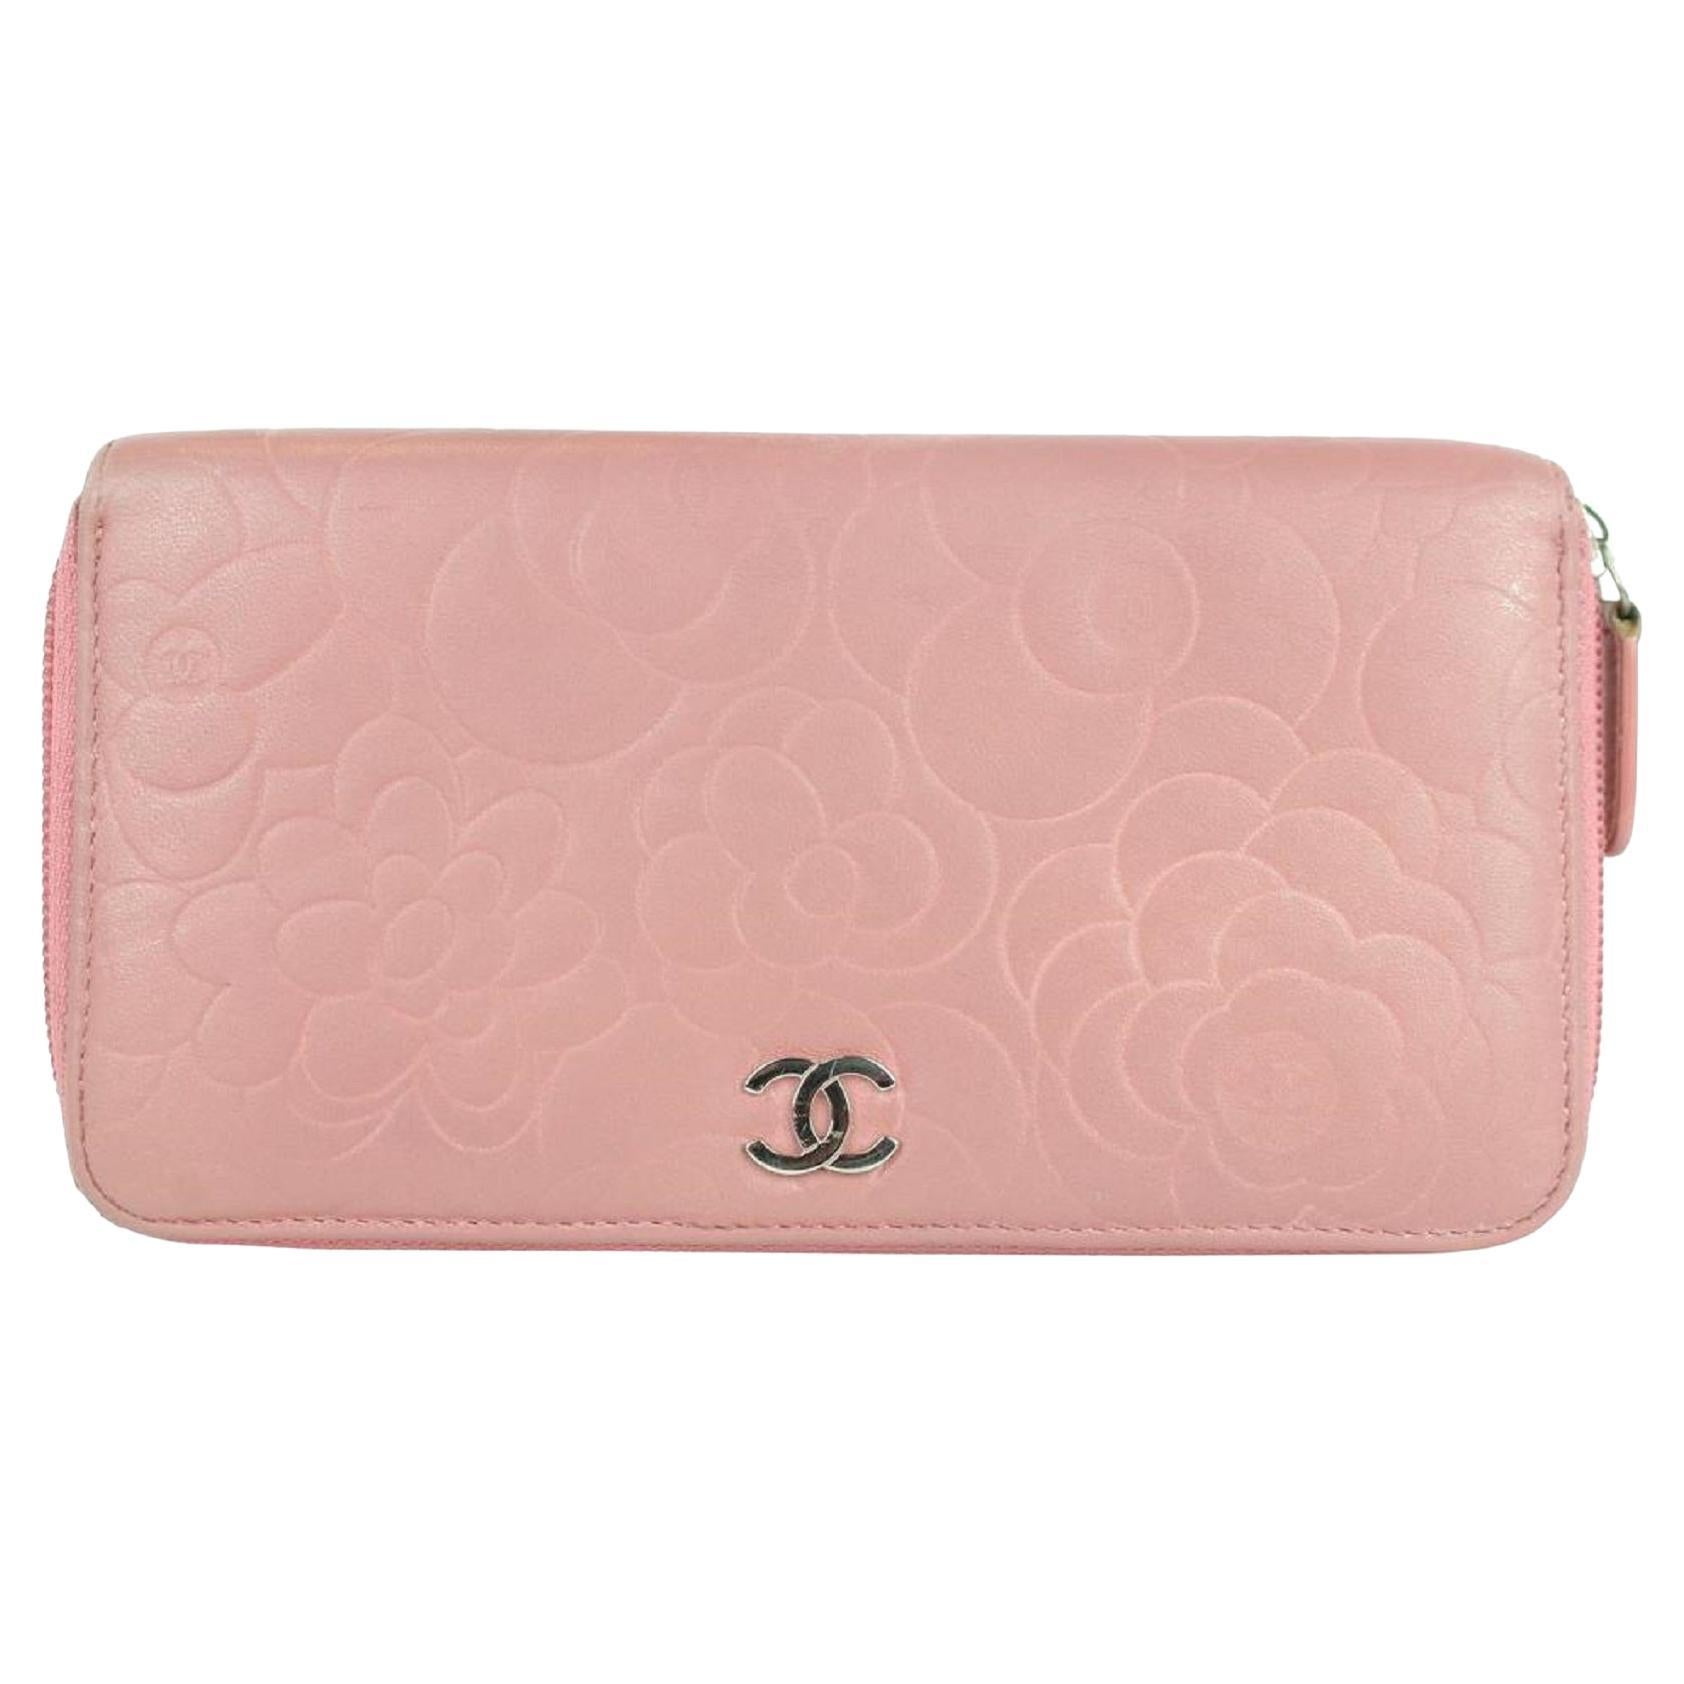 Chanel Embossed Camellia Gusset Zip Around Wallet 2cj1110 Pink Leather Clutch For Sale